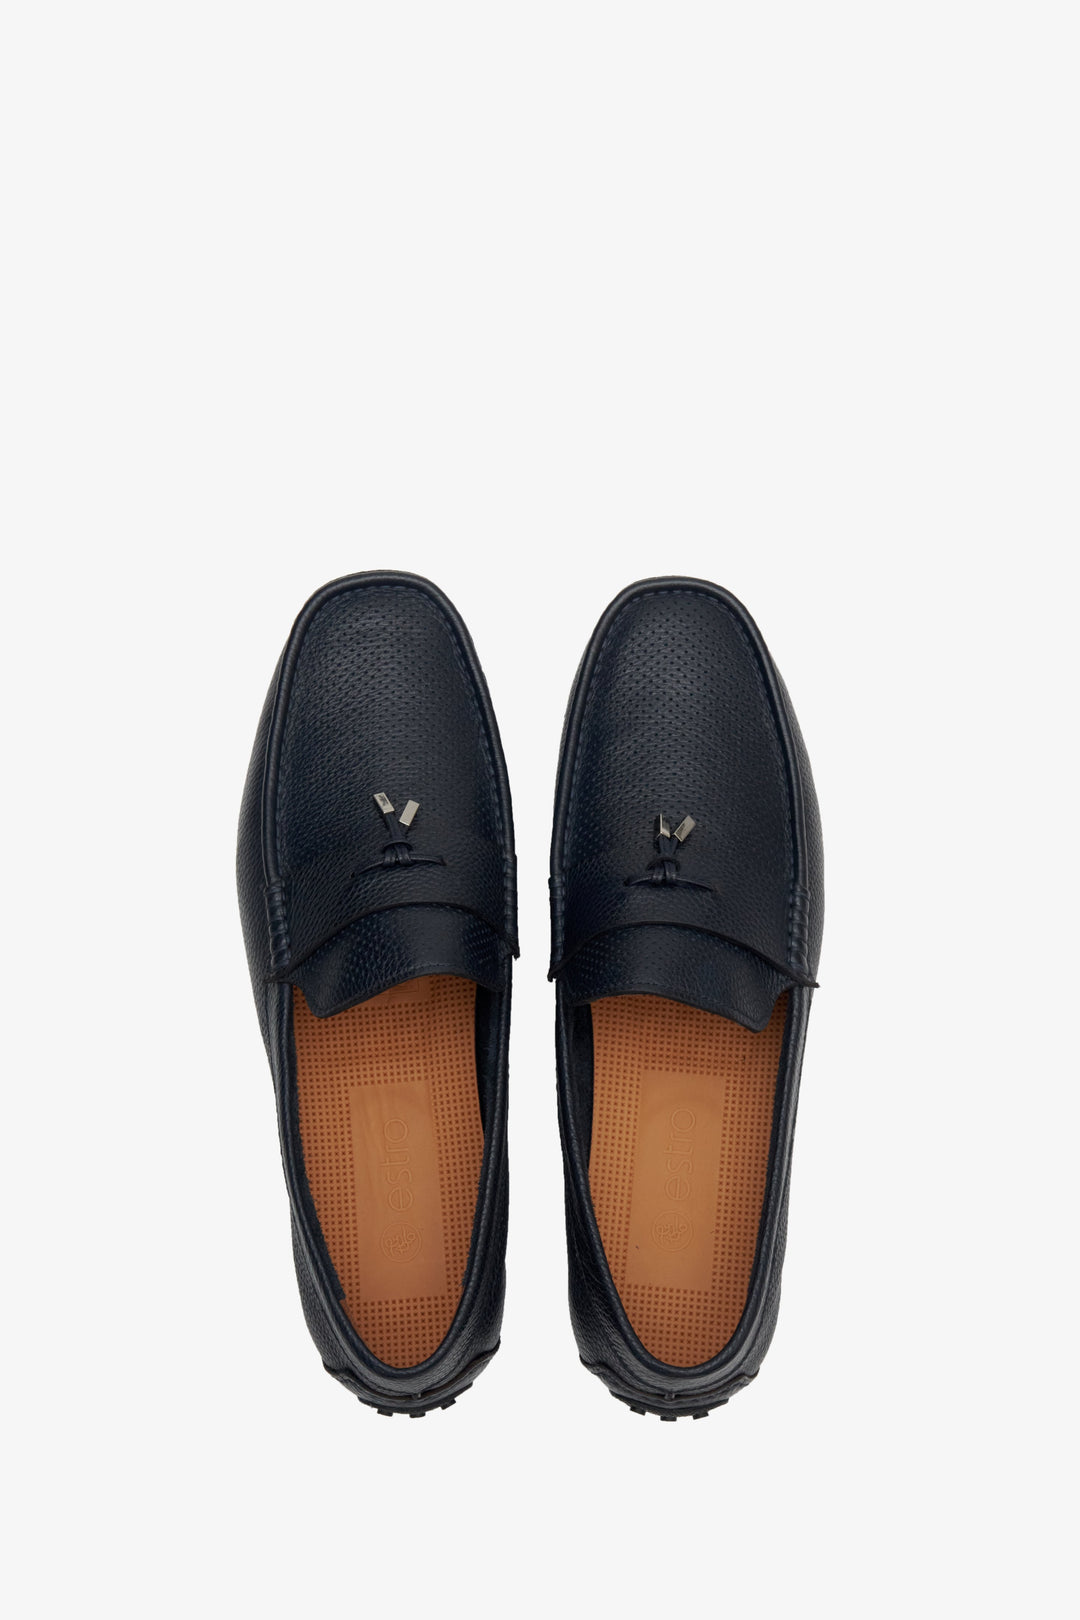 Leather, navy blue men's loafers by Estro - top view shoe presentation.